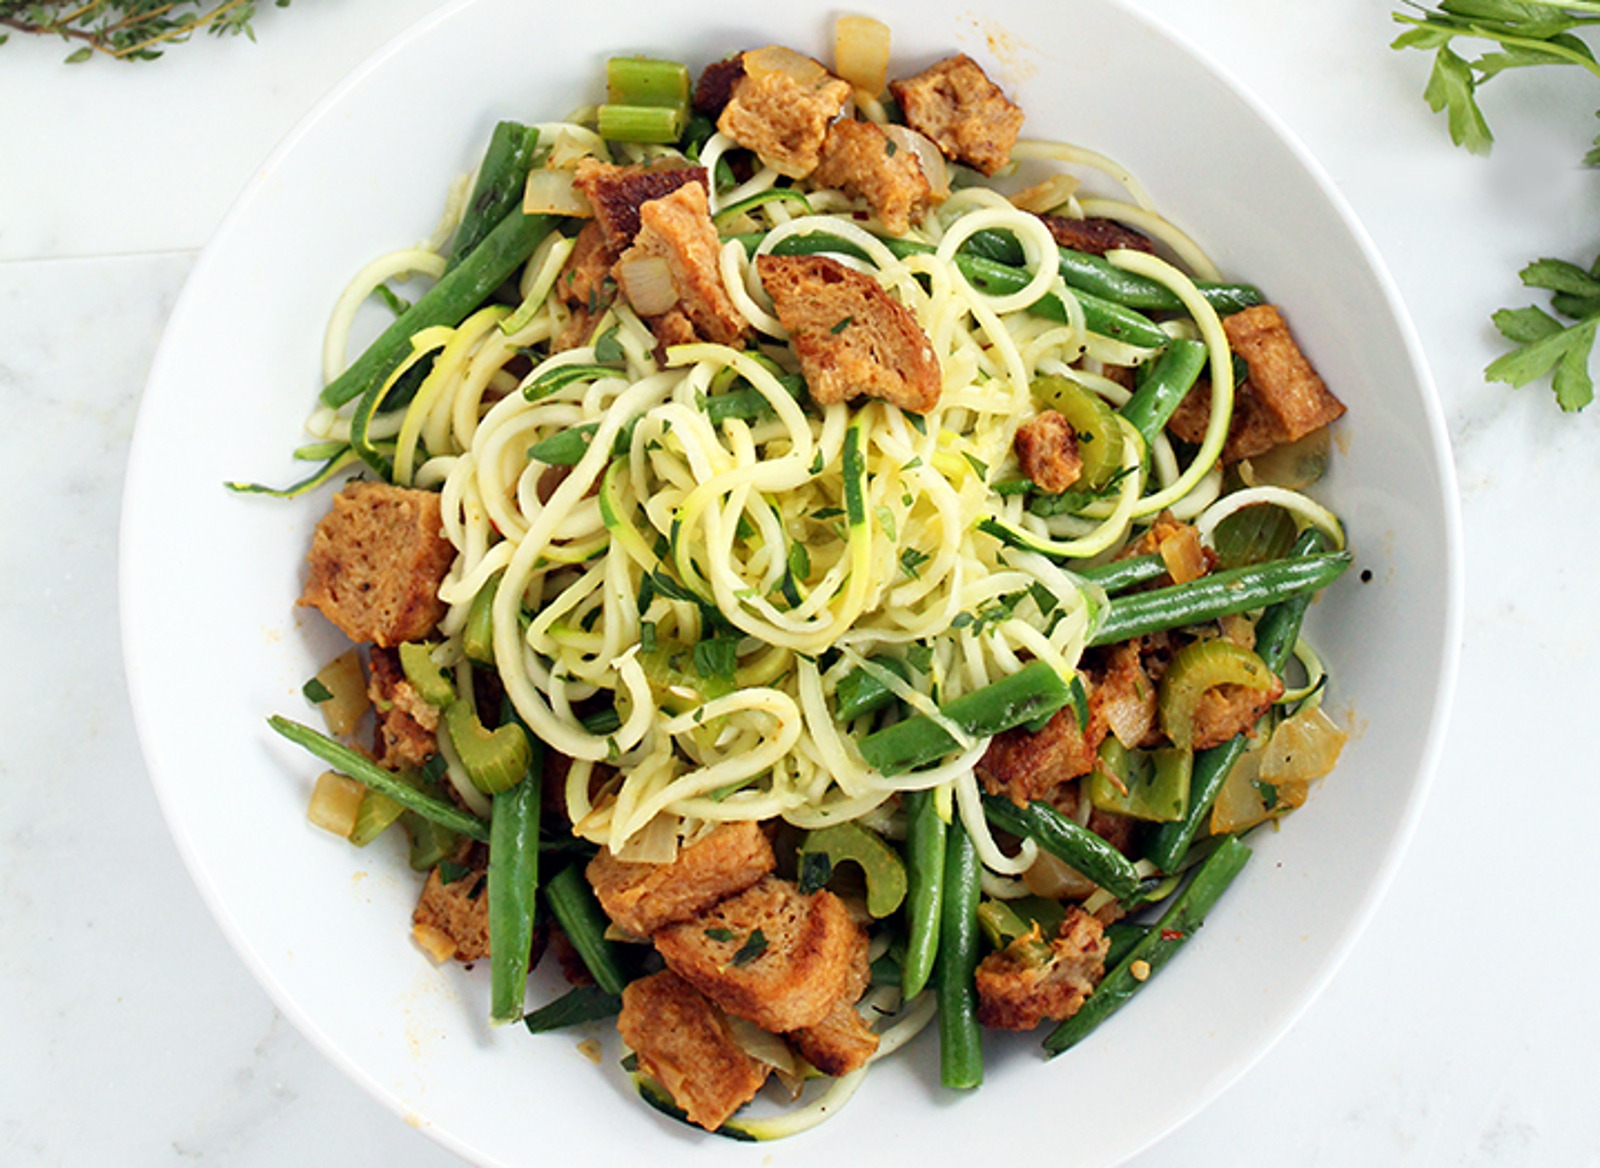 20 Meal Ideas to Ease the Transition to a Meatless Diet